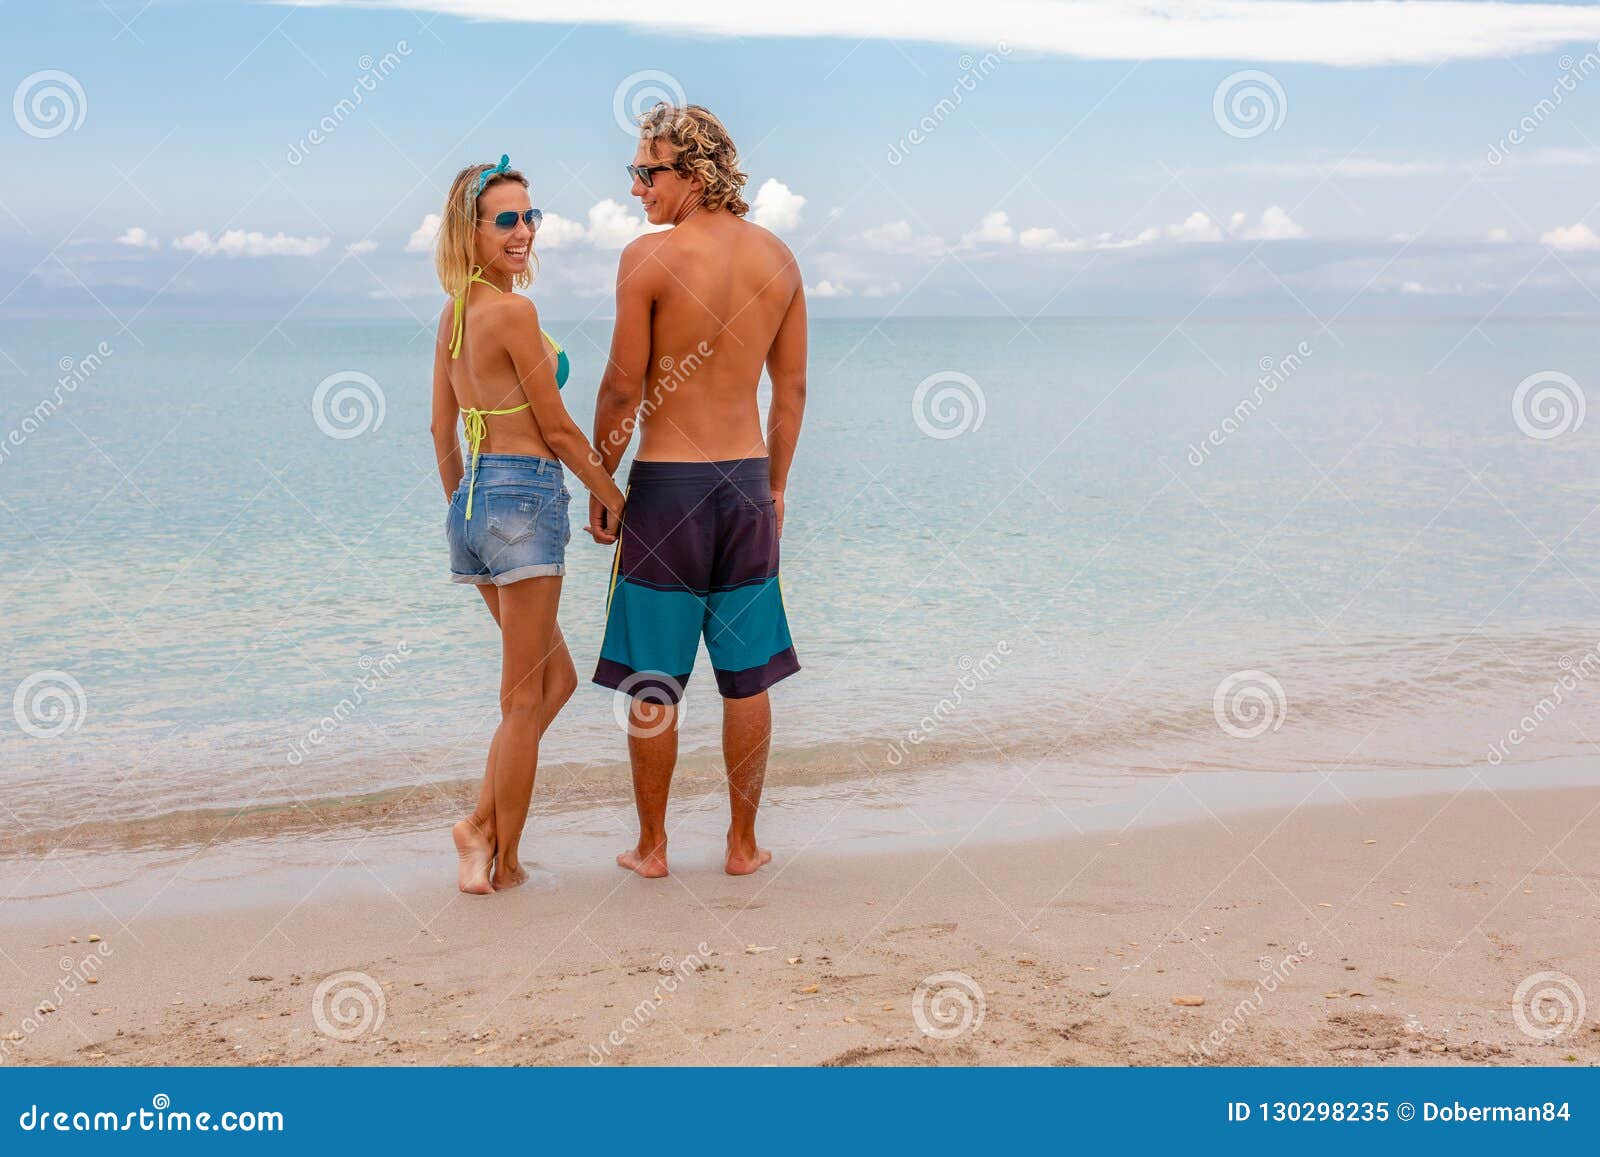 Portrait of Young Couple in Love Embracing at Beach and Enjoying Time